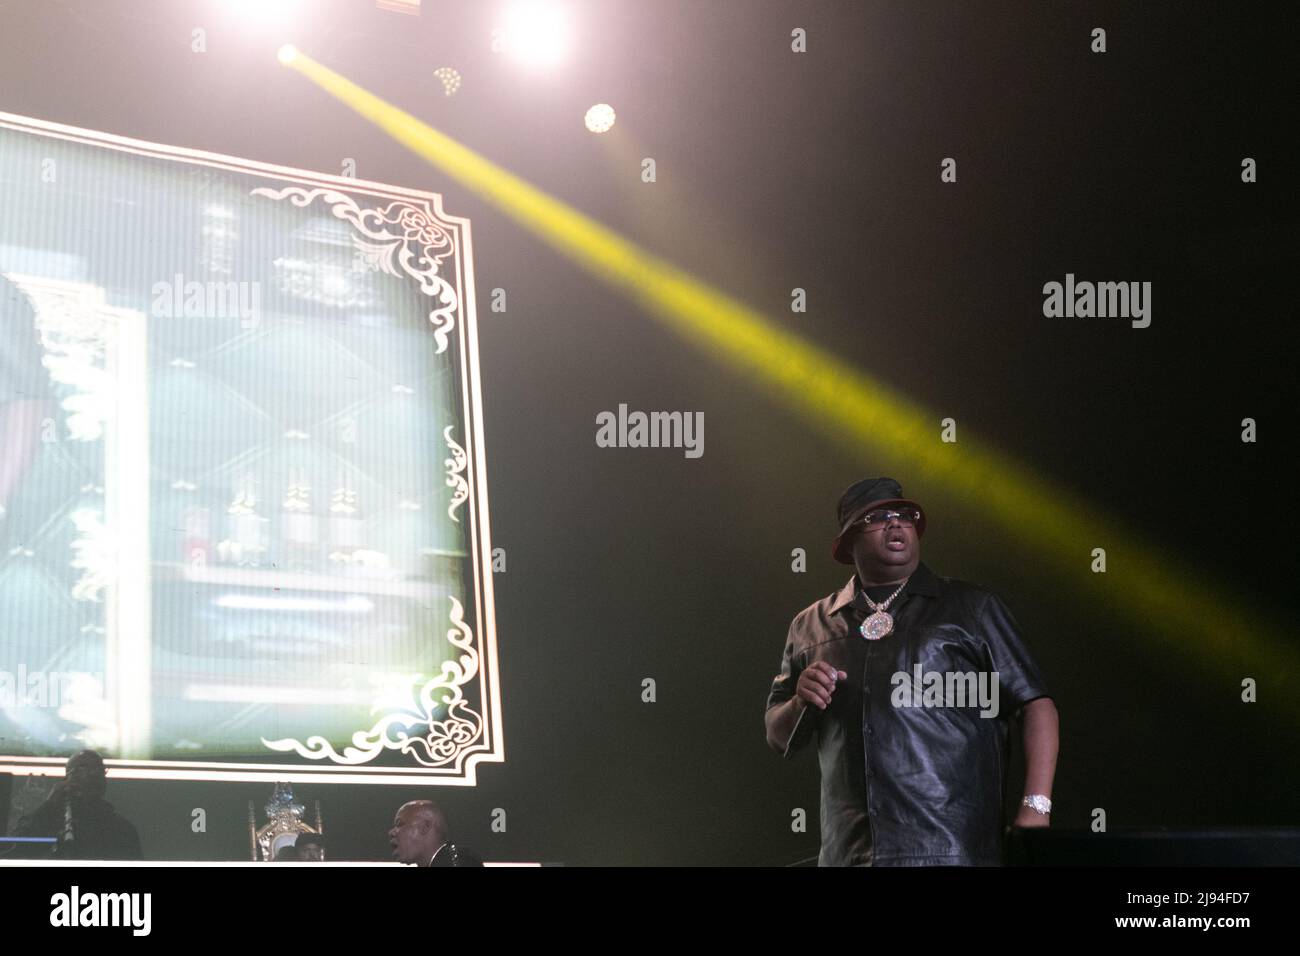 E-40 performs with Mount Westmore on Thursday, May 19, 2022 at Pechanga Arena in San Diego, California. Mount Westmore is a hip hop supergroup that includes Snoop Dogg, Ice Cube, E-40, and Too Short. They will be releasing their debut album later this year. (Photo by Rishi Deka/Sipa USA) Credit: Sipa USA/Alamy Live News Stock Photo